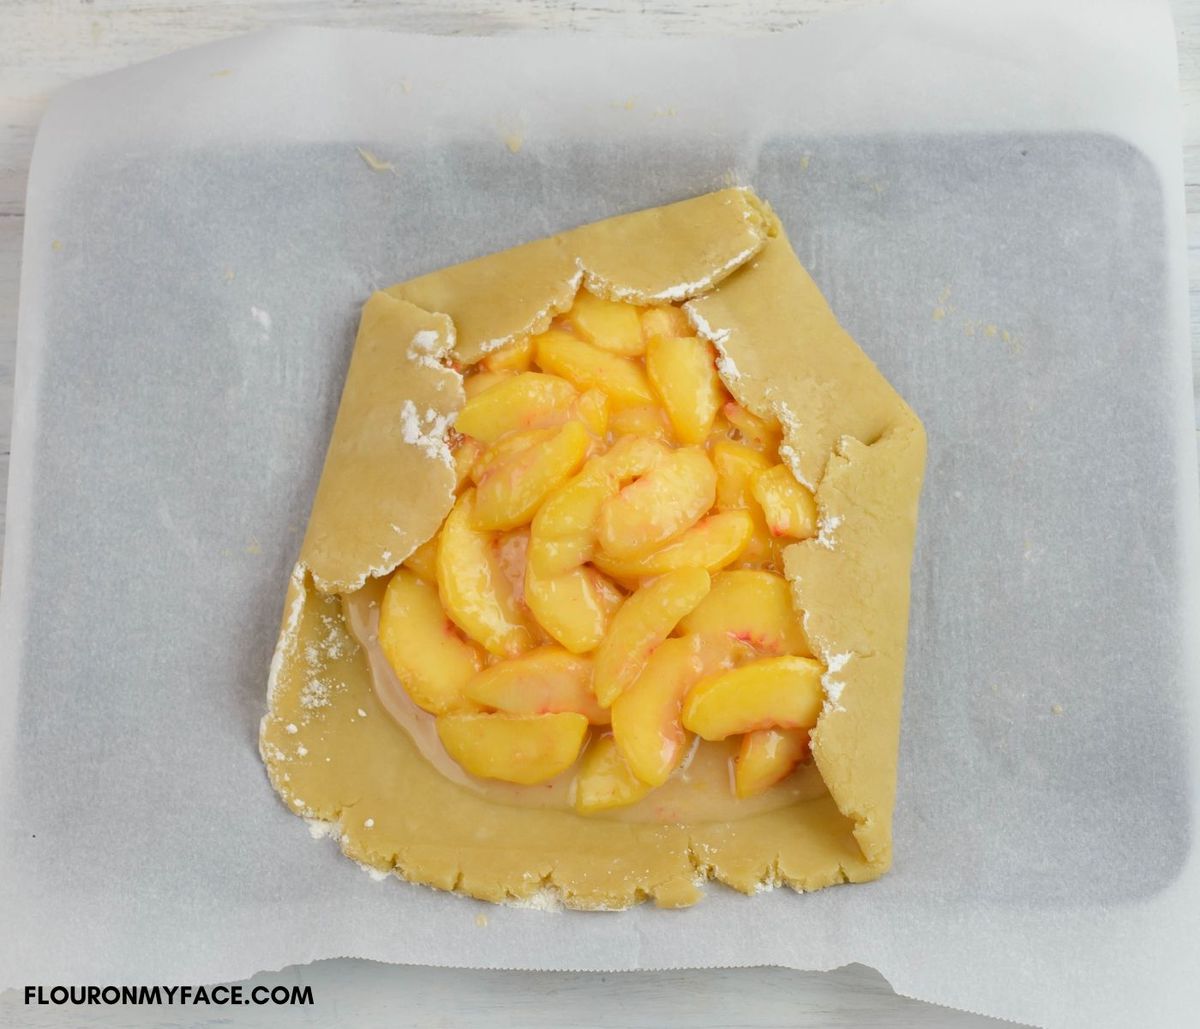 Folding the crust for a peach Galette over the filling.